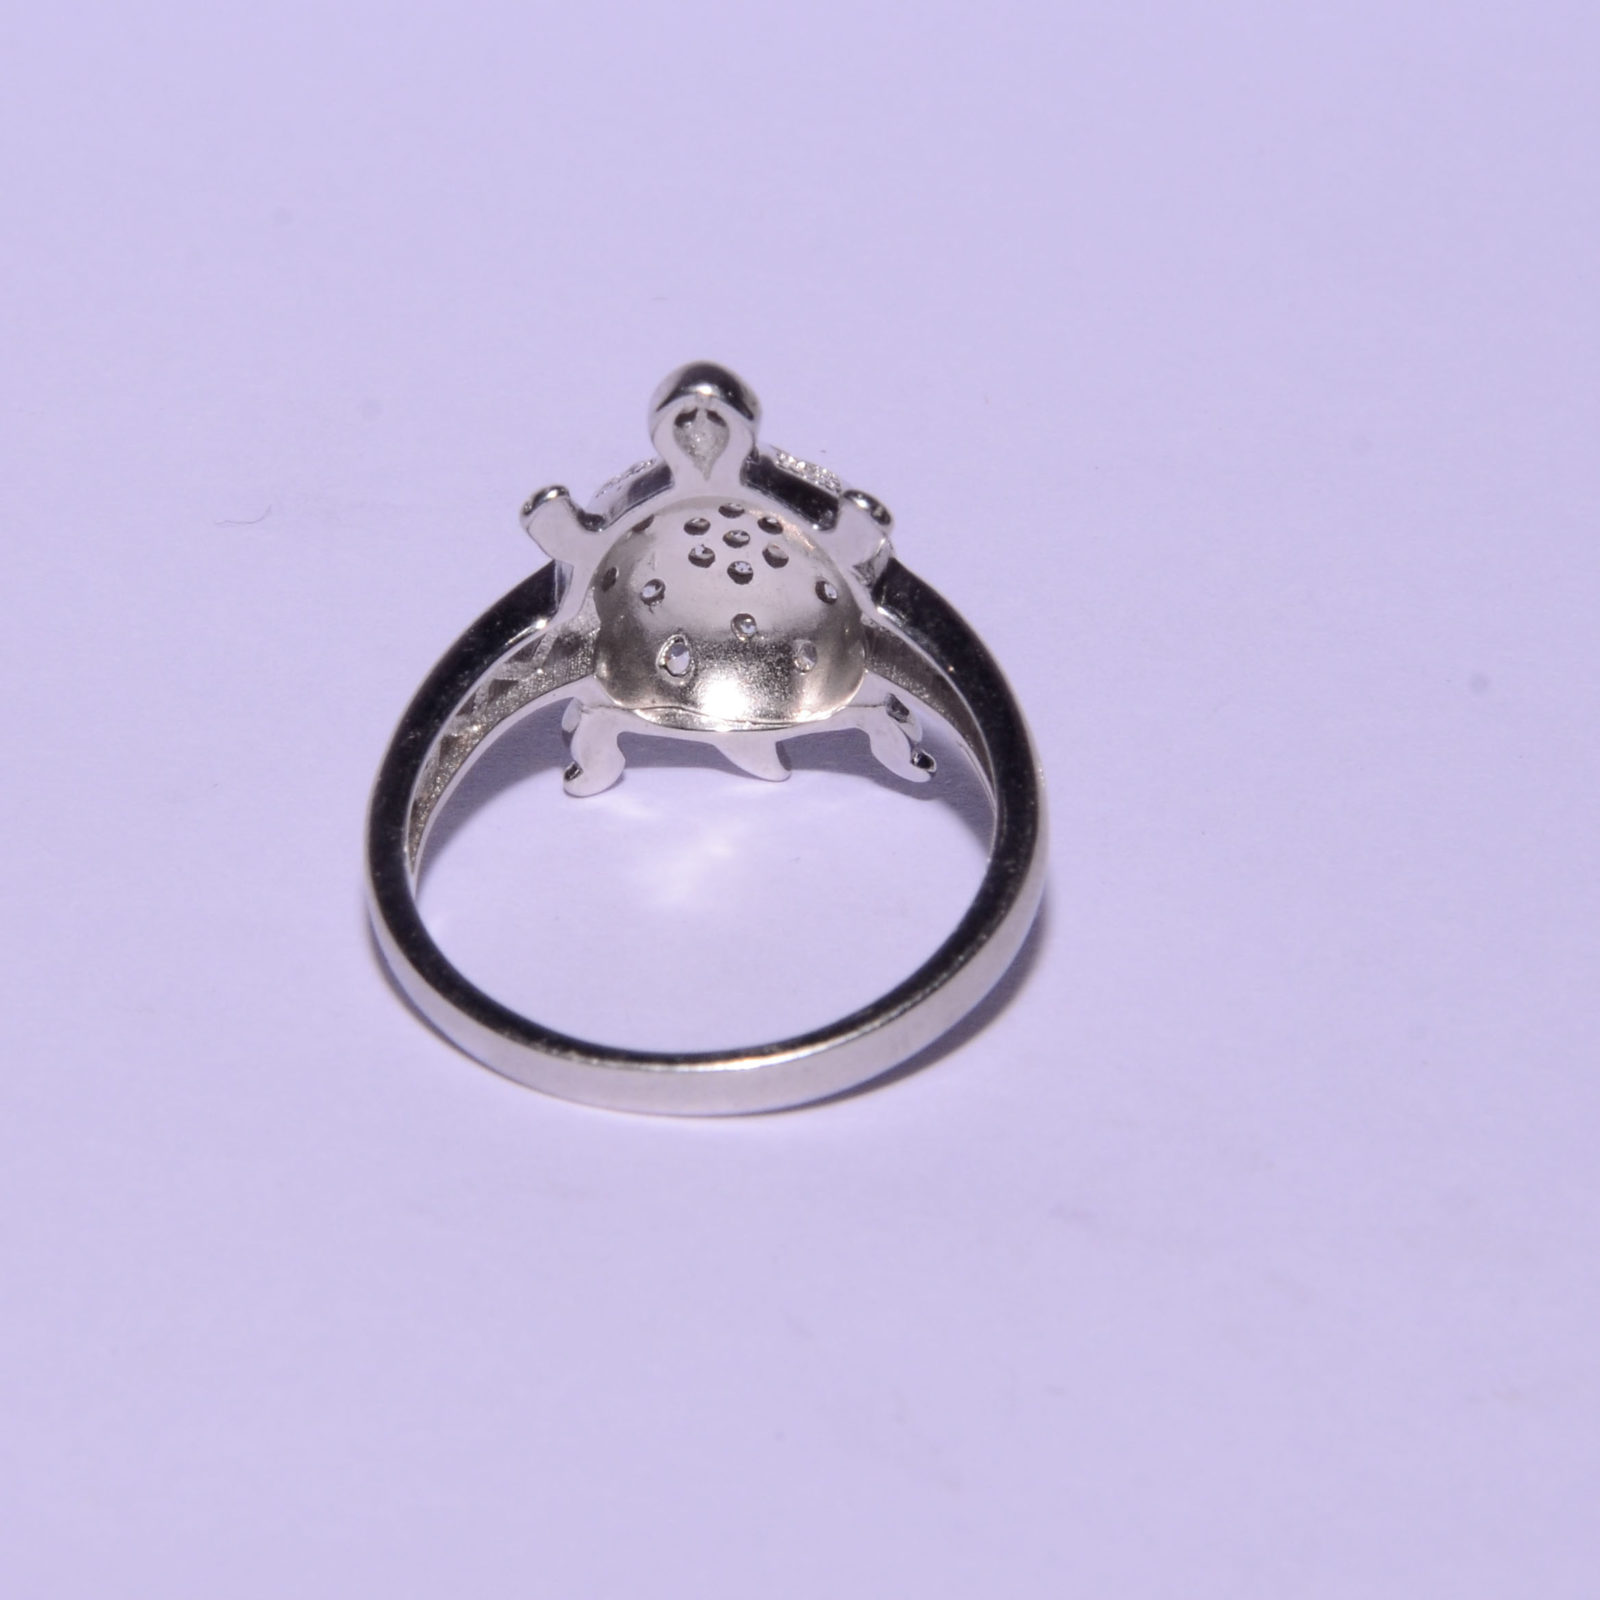 Tortoise Ring: Who should wear it? What are the benefits of wearing a  tortoise ring?